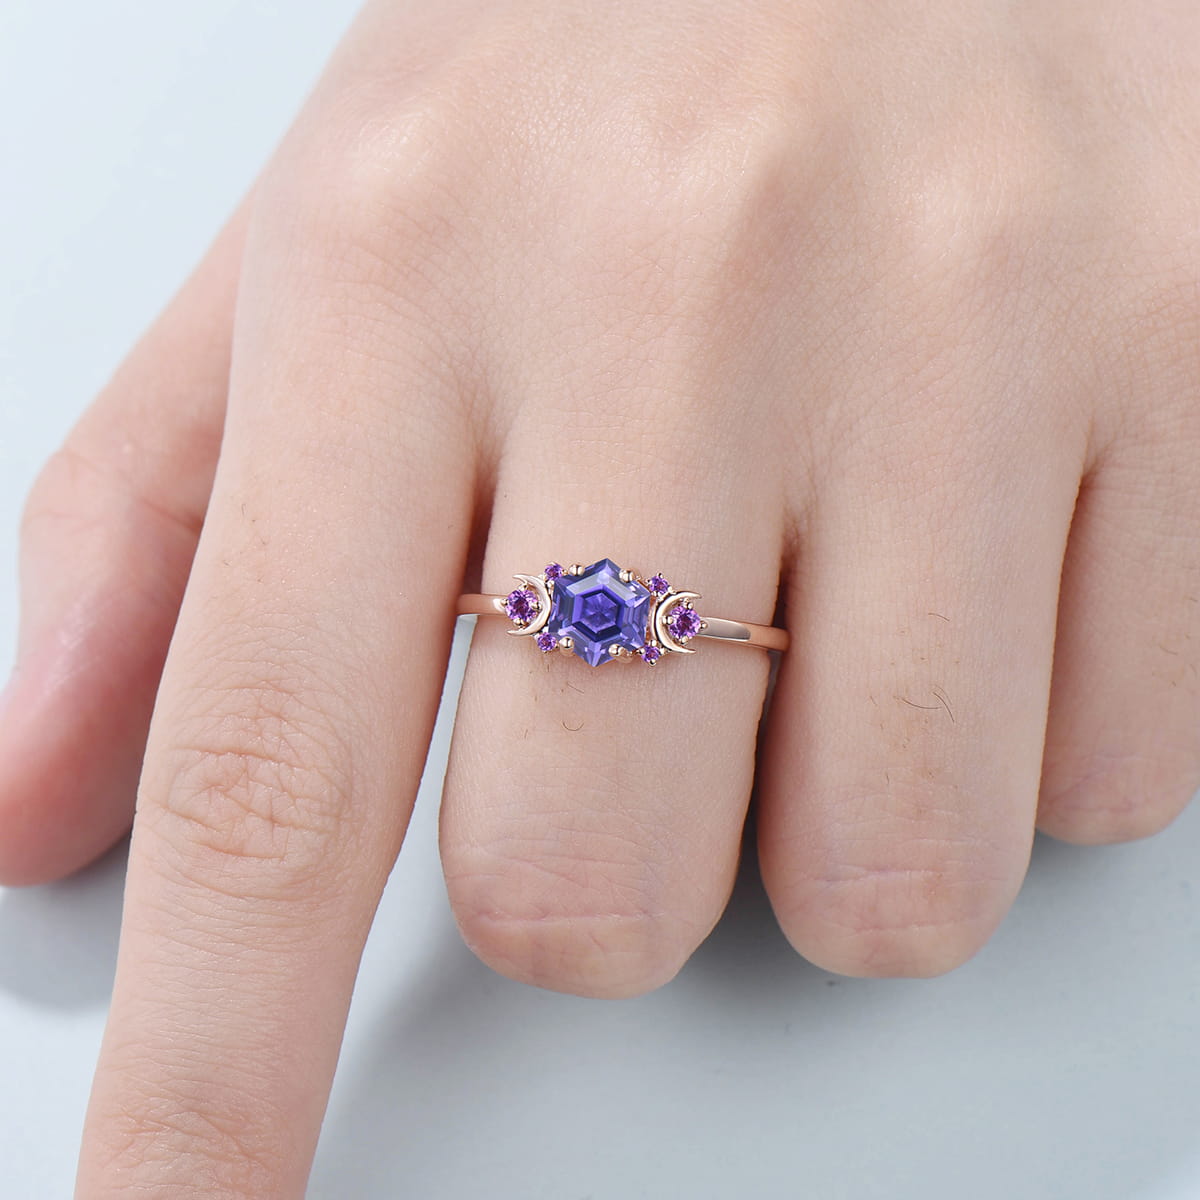 Vintage Purple Sapphire Engagement Ring Unique Hexagon Amethyst Moon Wedding Ring Women February Birthstone Gift Purple Crystal Promise Ring - PENFINE